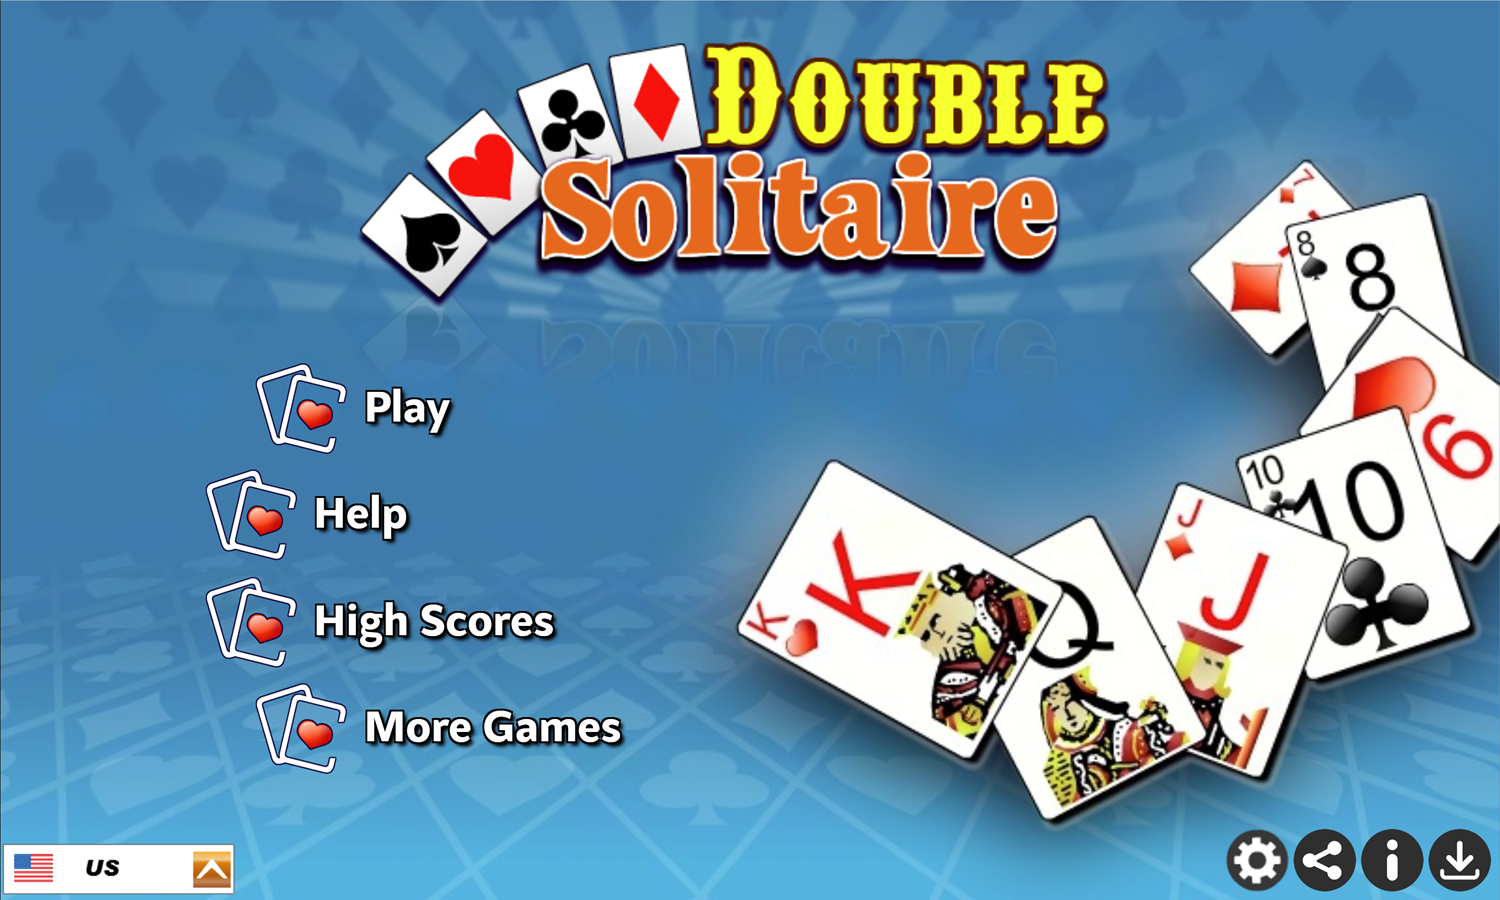 Double Solitaire Game Welcome Screen Screenshot.